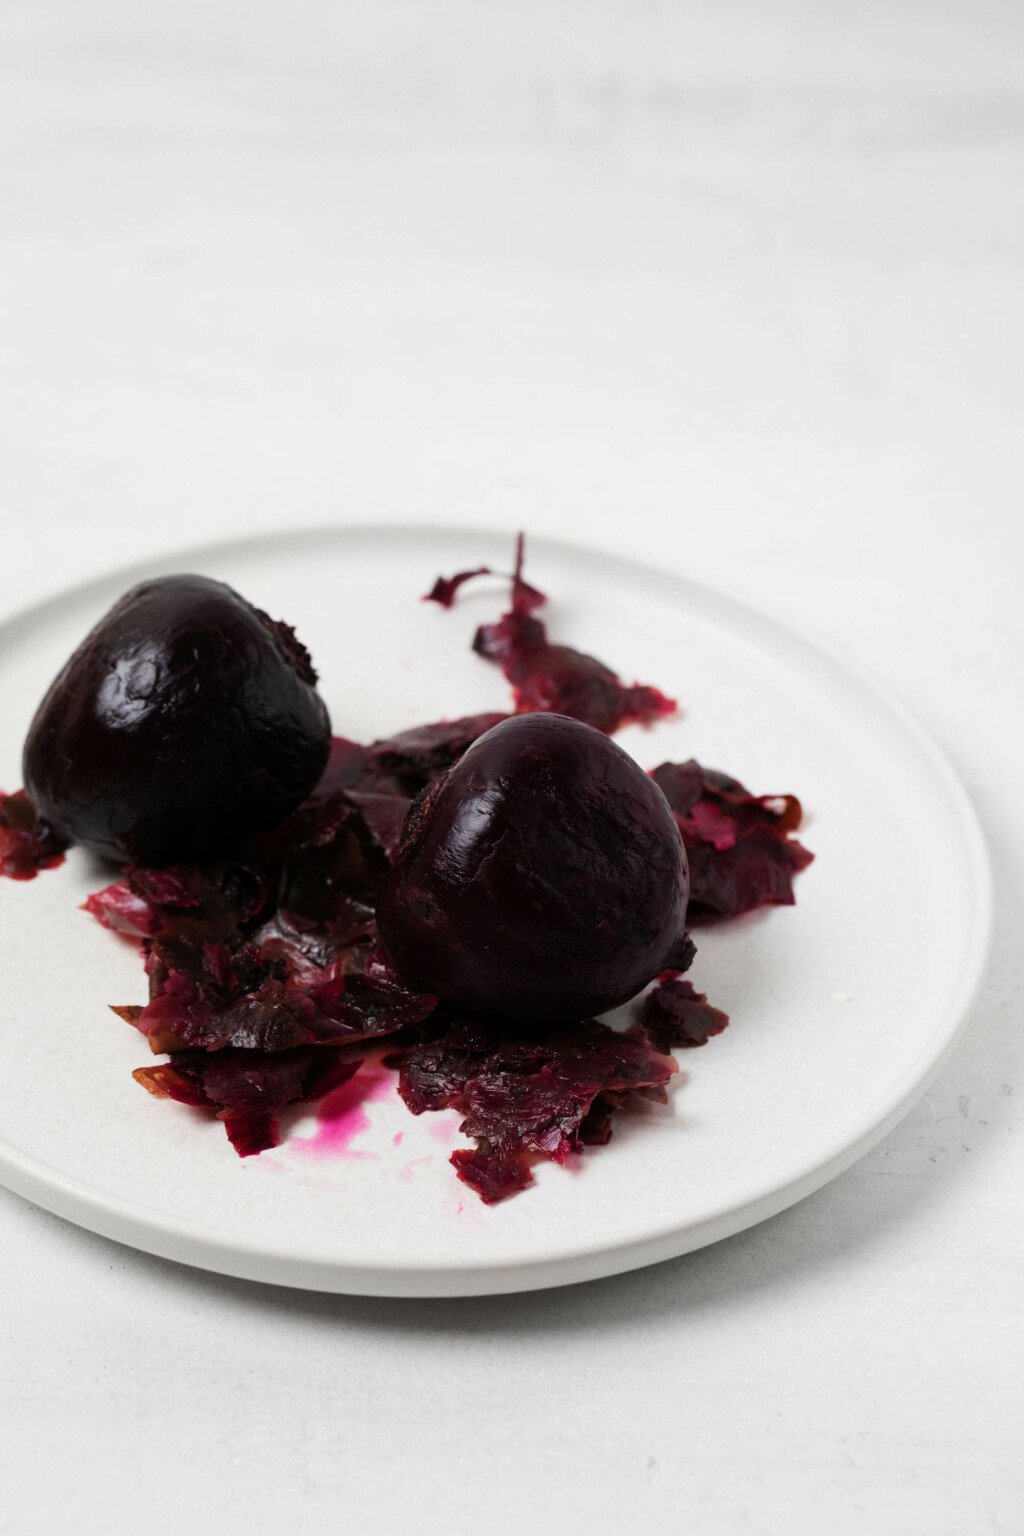 Roasted beets just peeled.  Peeled beets rest on a white plate.